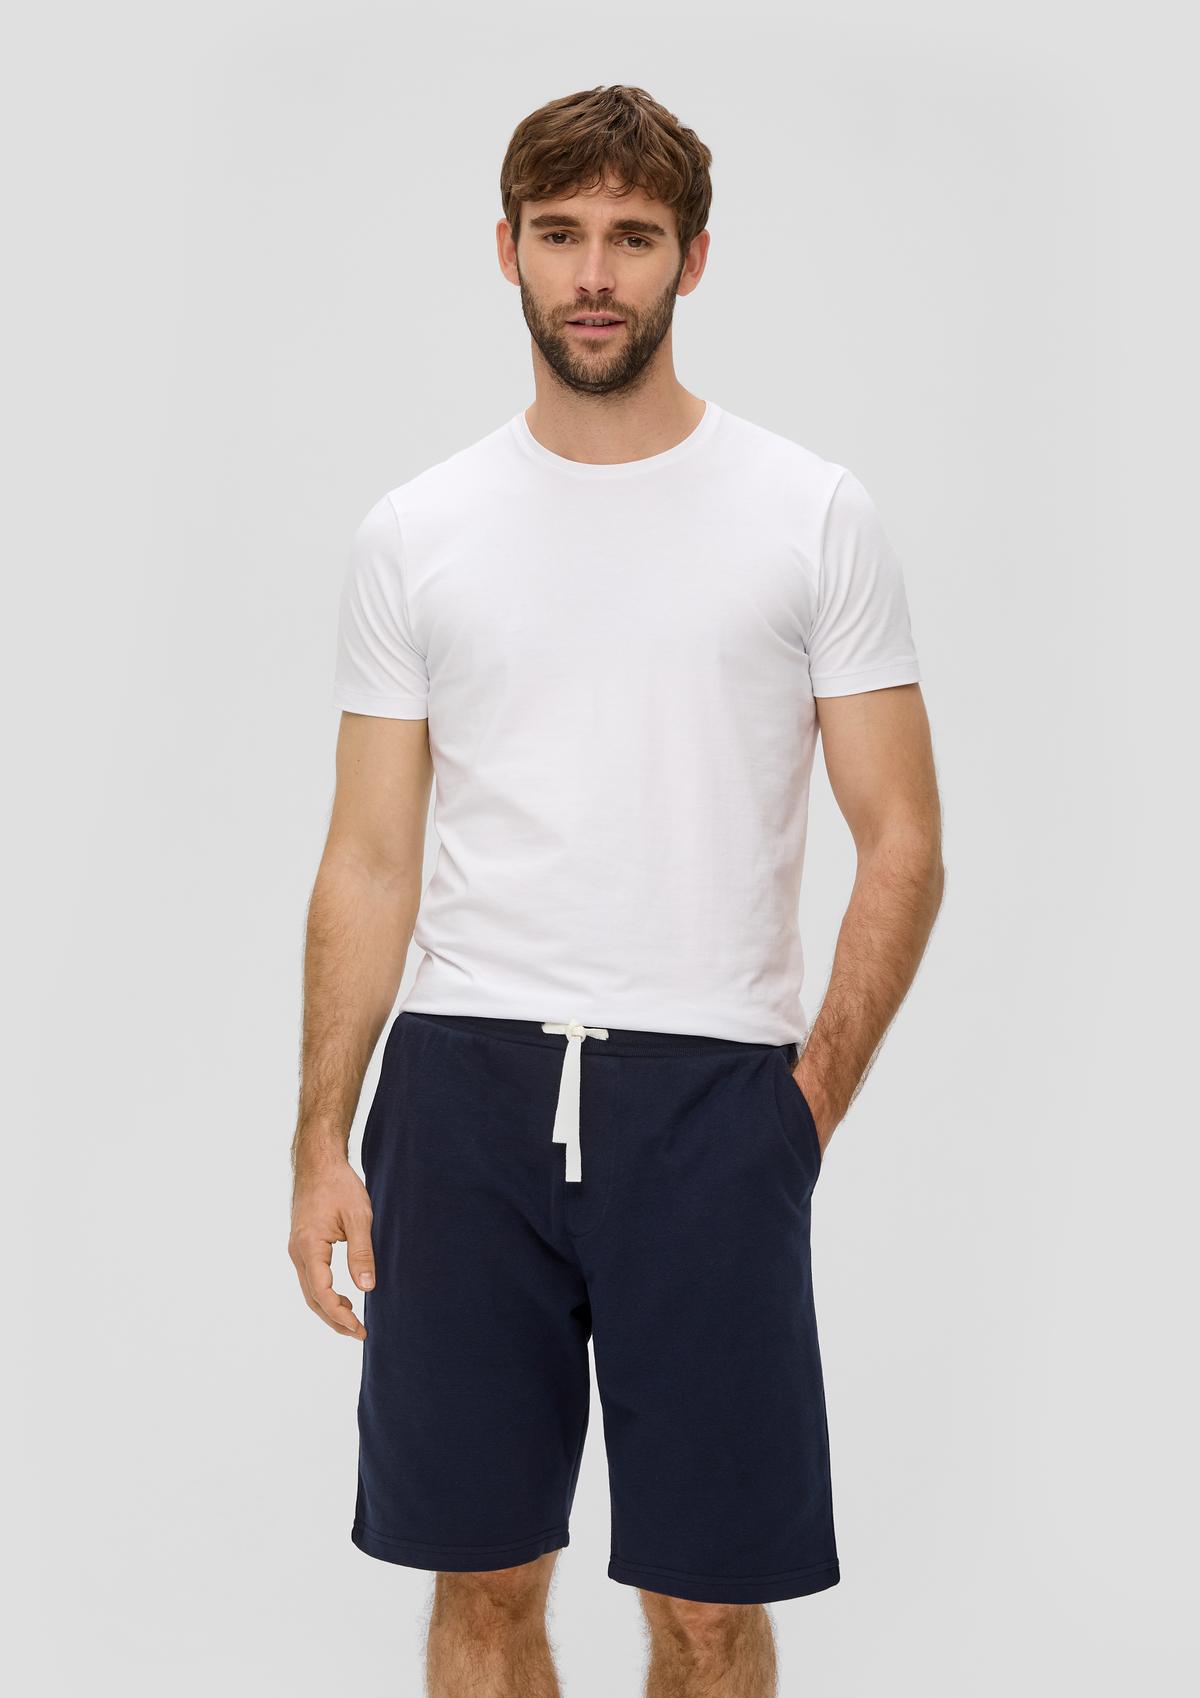 Relaxed fit: sweat shorts with an elasticated waistband